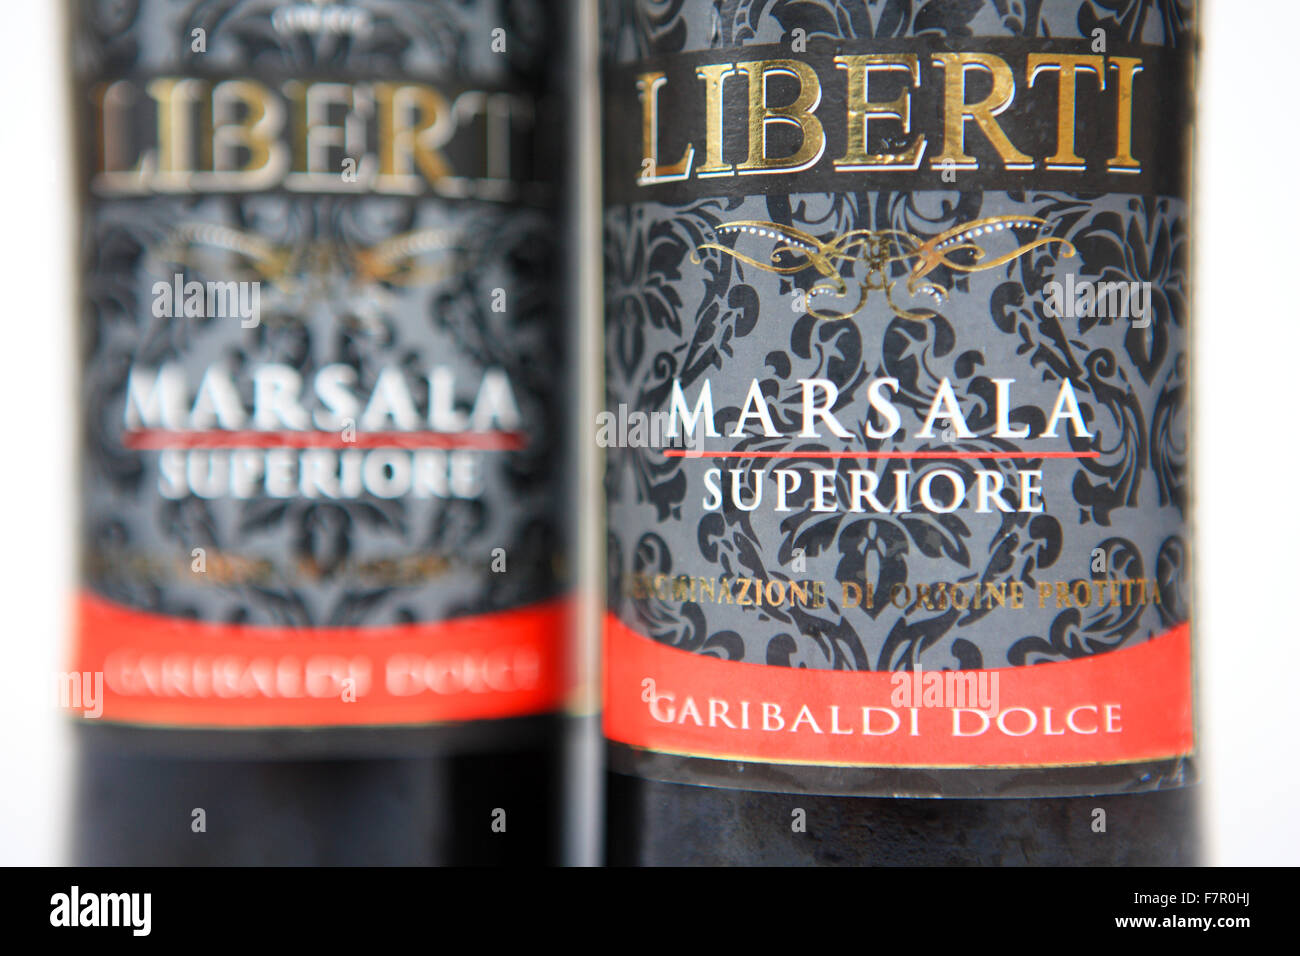 Bottles of Marsala wine from Sicily, Italy and often used in cooking Stock Photo